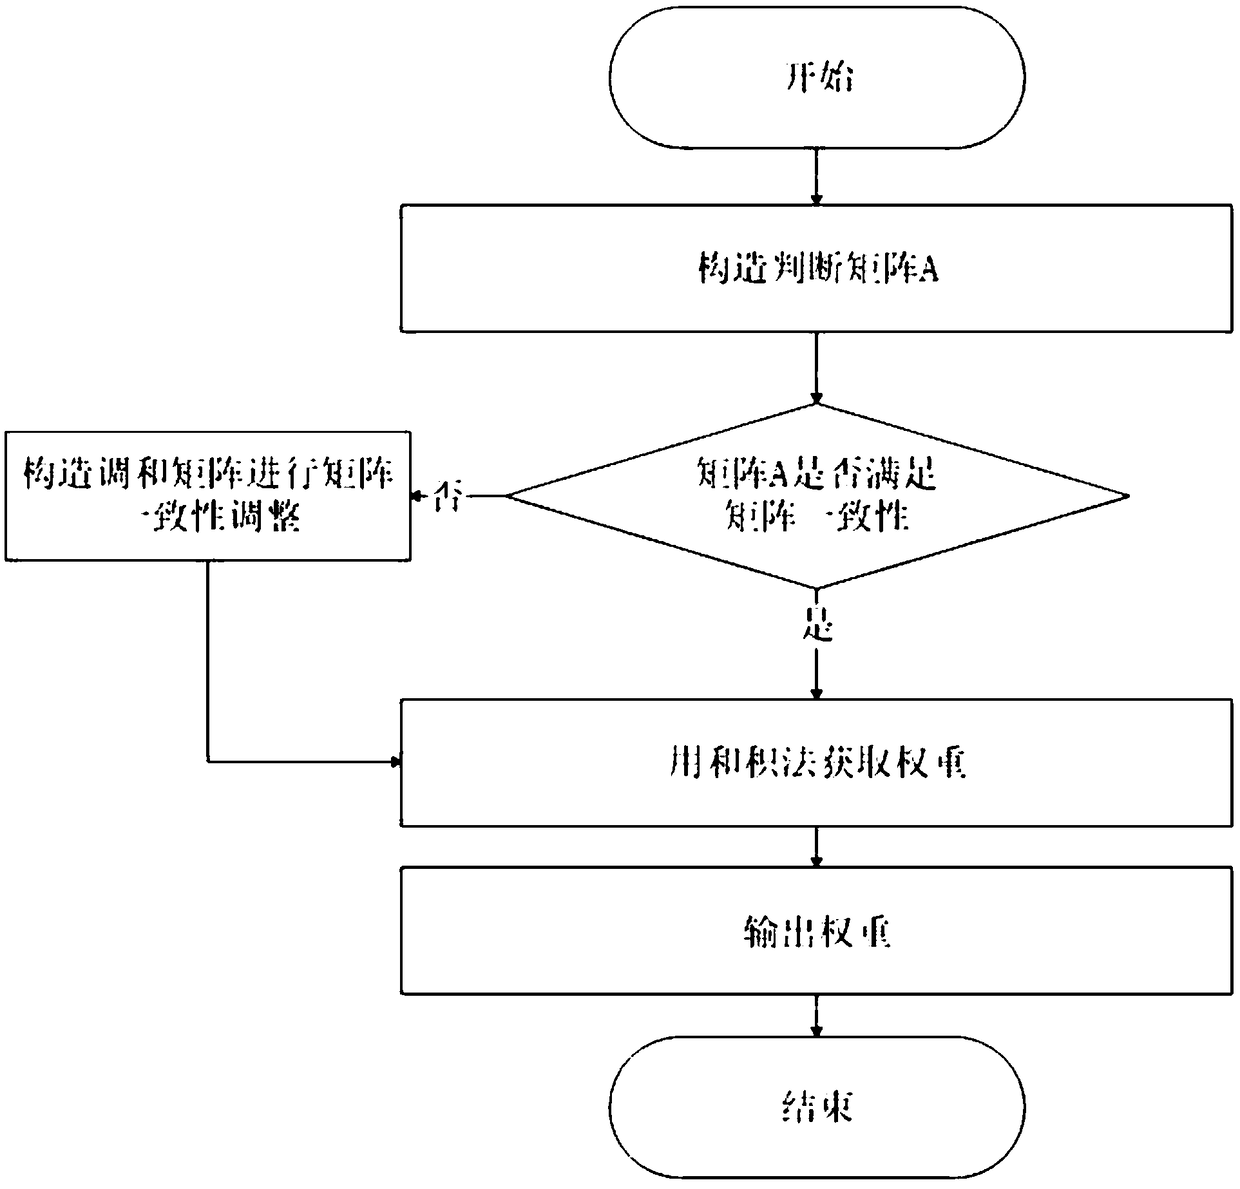 Automatic bid evaluation method used for building material purchasing